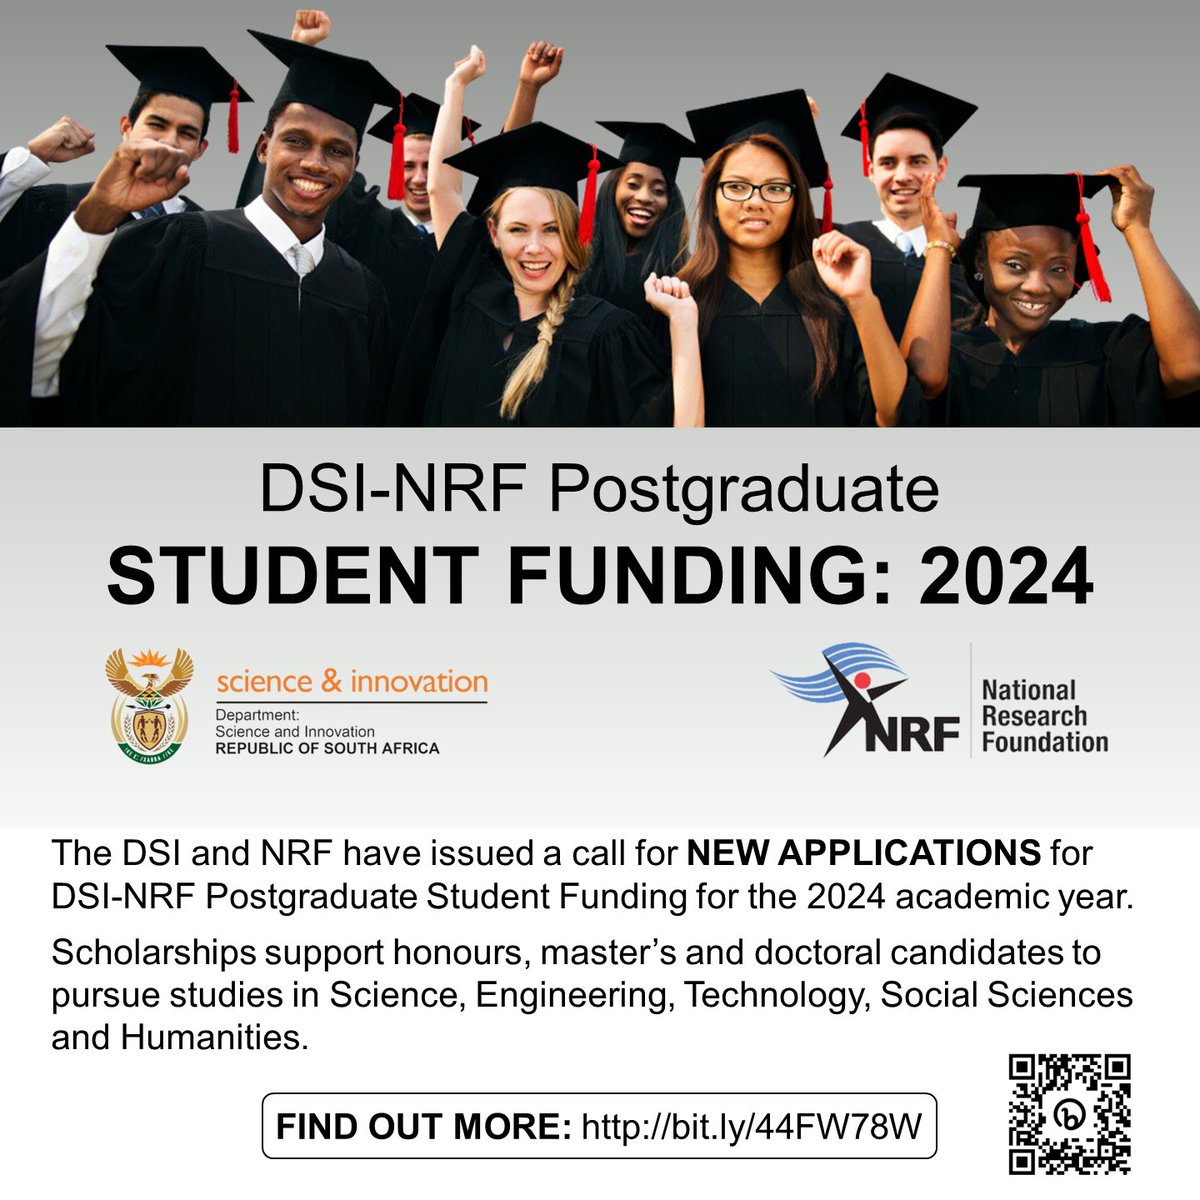 The DSI-NRF has called for new applications for Postgraduate Student Funding for the 2024 academic year. Deadlines for first-time applications: Masters & Doctoral - 11 Jul; Honours - 24 Nov. mailchi.mp/nithecs/dsi-nr… #dsinrf #postgraduatefunding